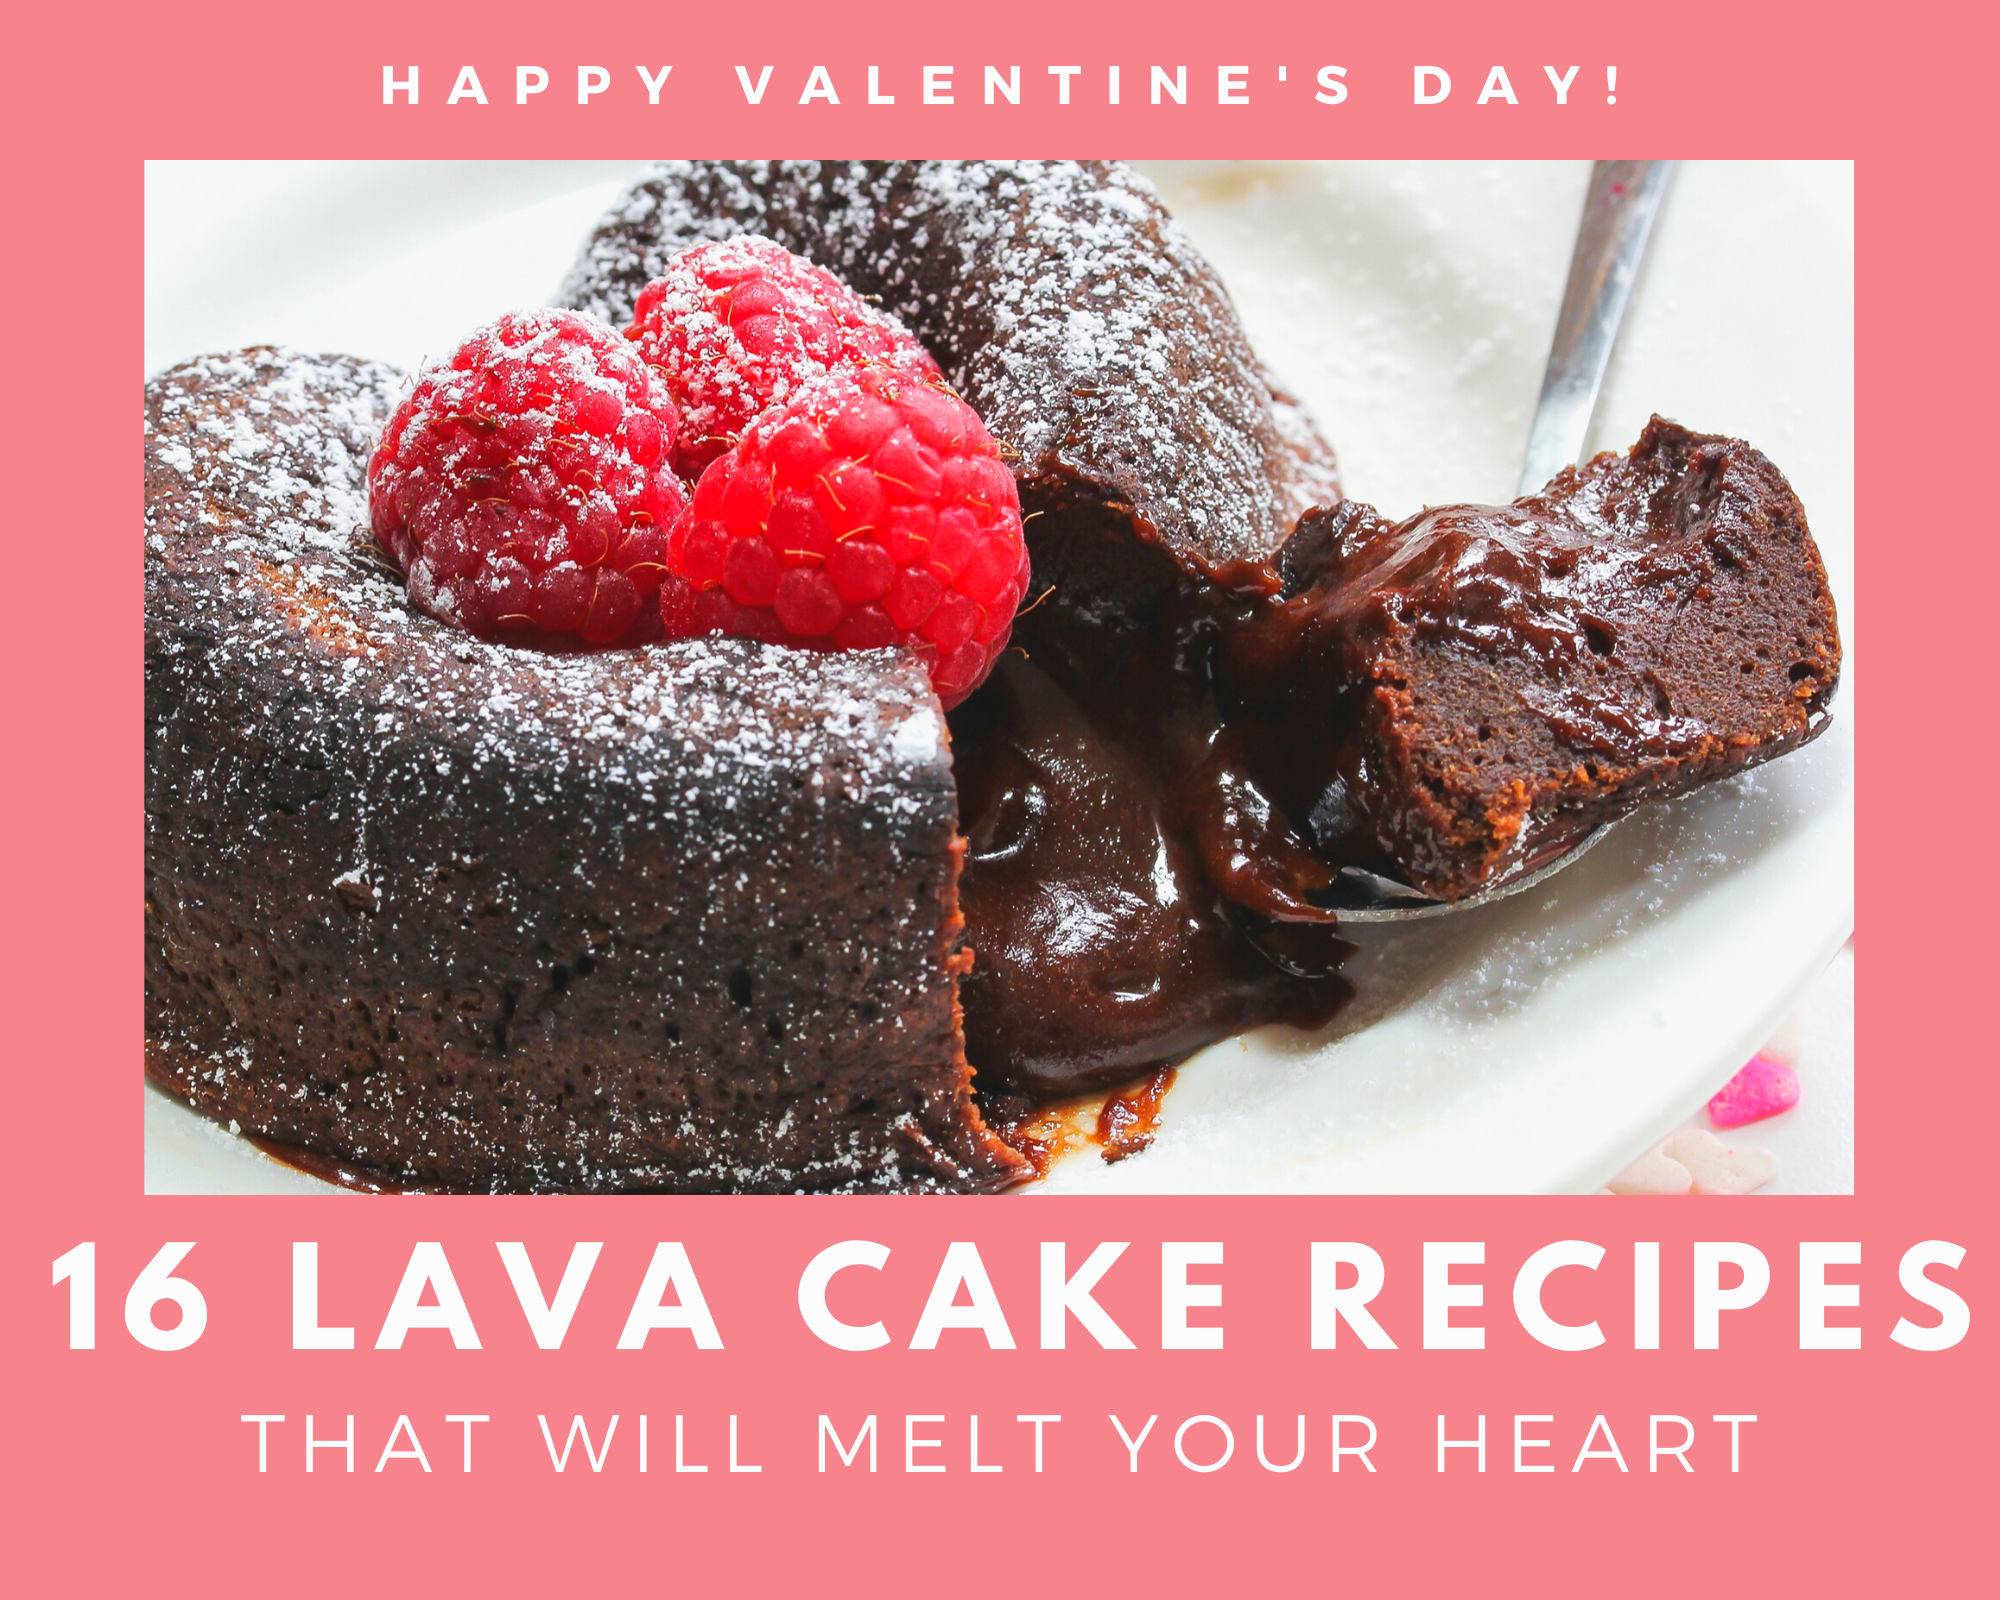 Dominos choco lava cake check out this link! 